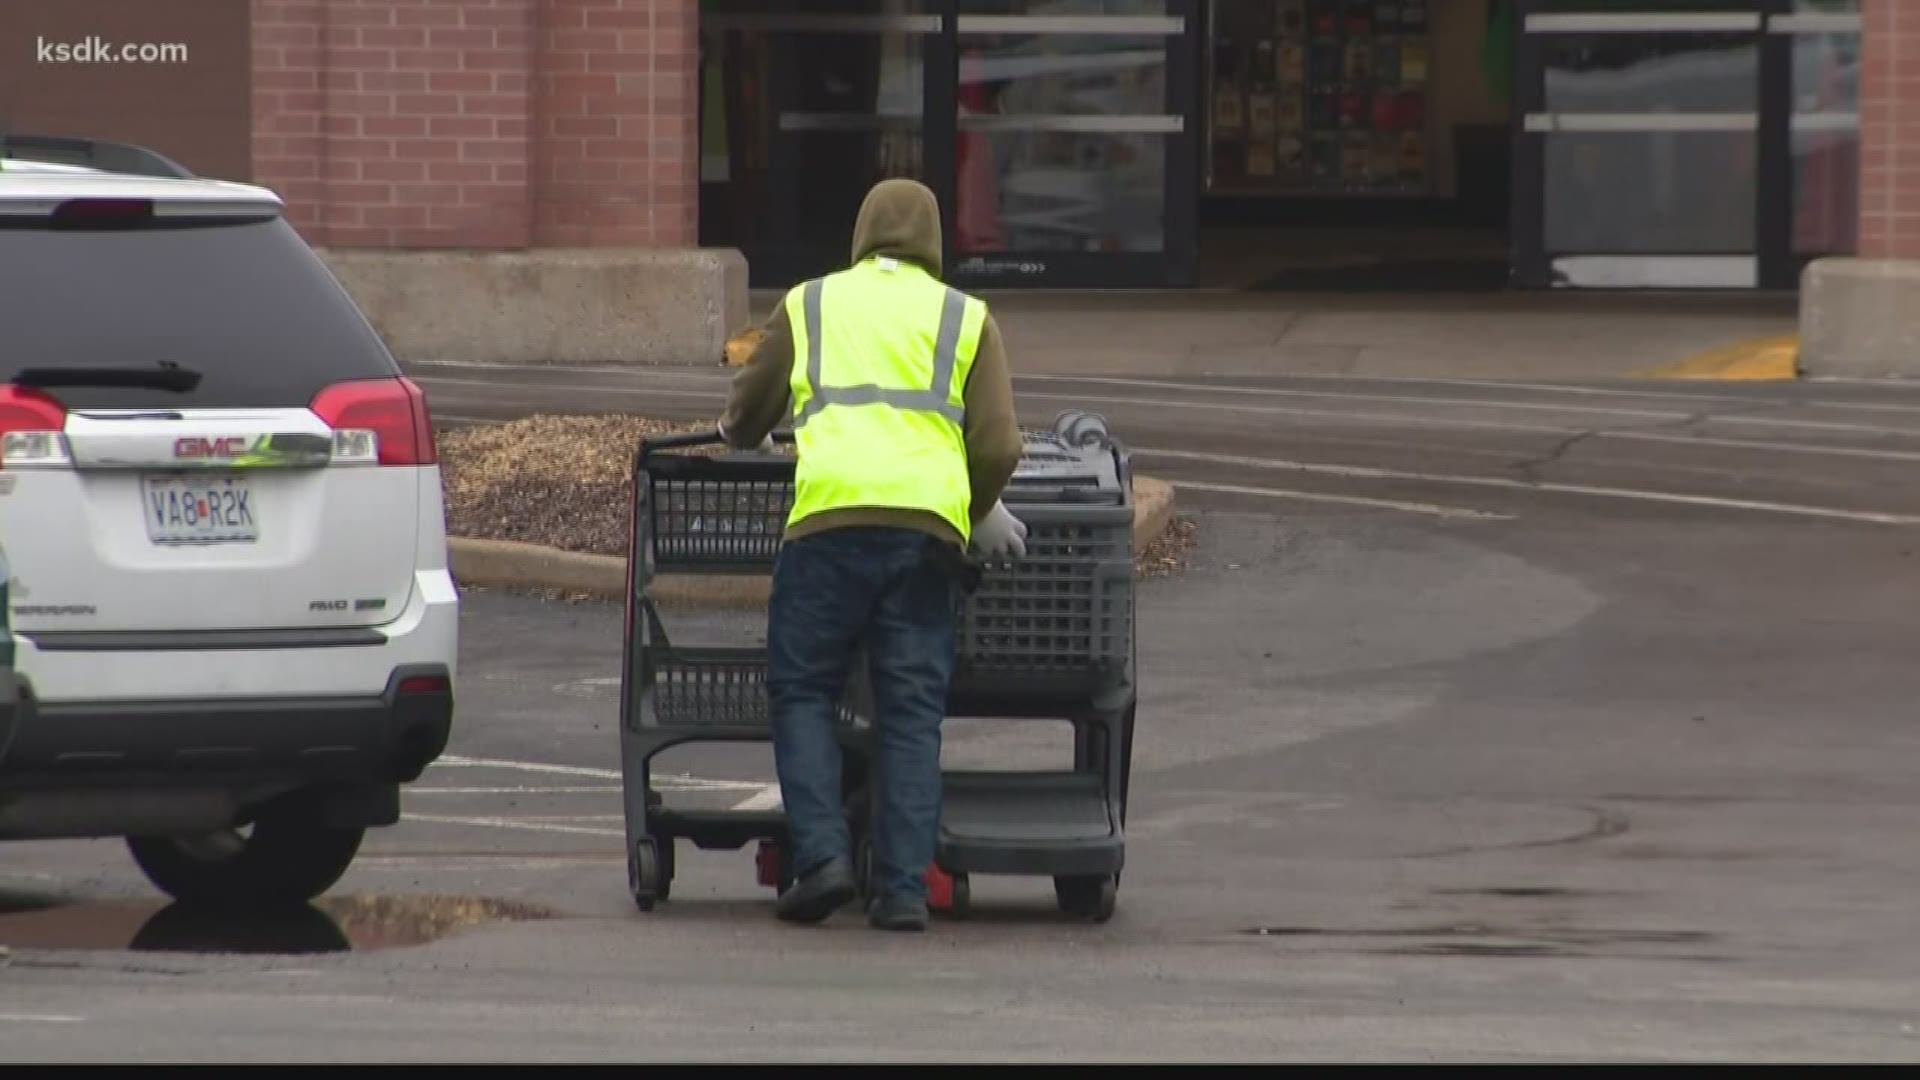 Many national and local grocery chains are looking for help as people flood their stores to stock up